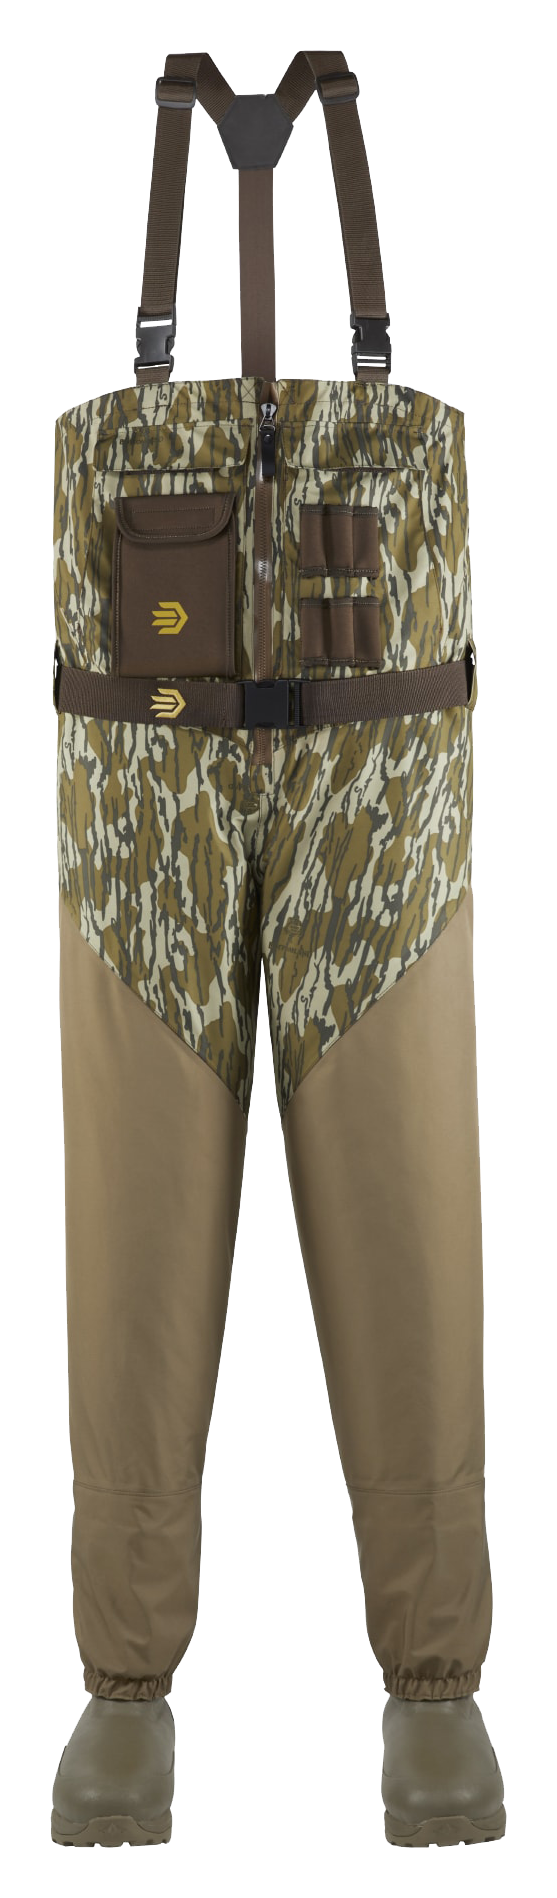 LaCrosse Alpha Agility Select Insulated Front-Zip Breathable Hunting Waders for Men - Mossy Oak Original Bottomland - 7/Medium